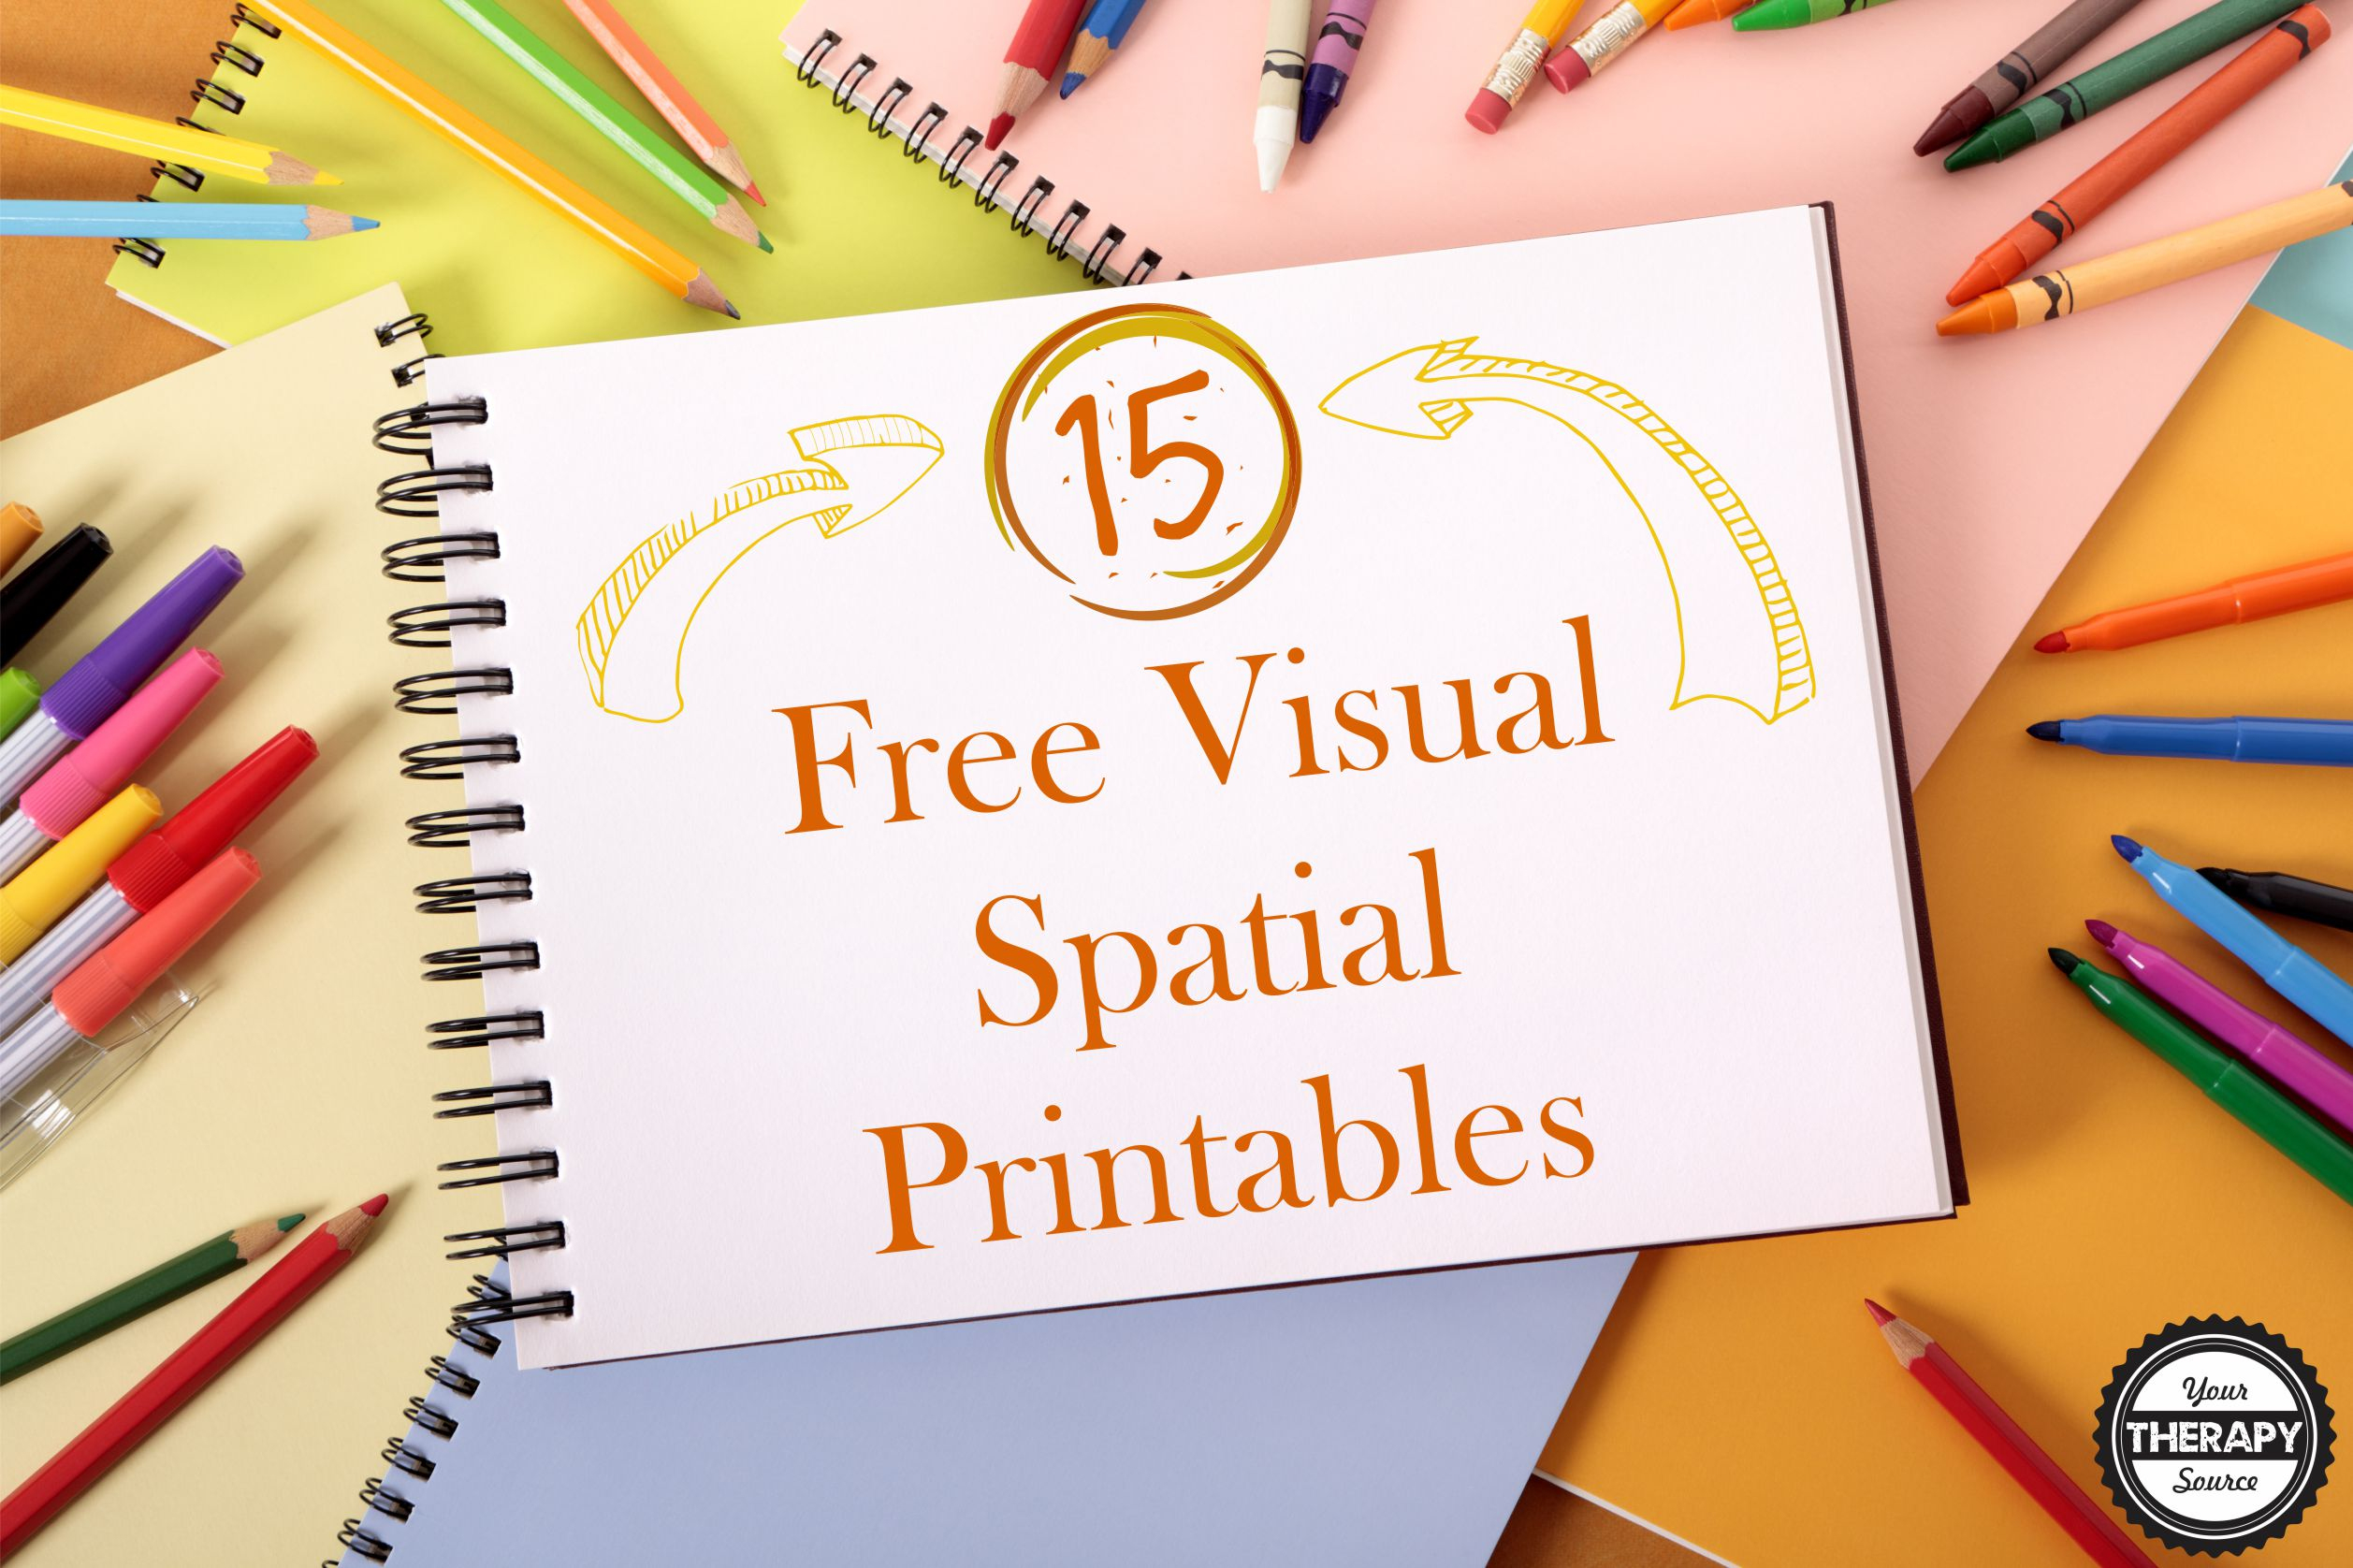 15 Free Visual Spatial Printables - Your Therapy Source - Free Printable Visual Puzzles